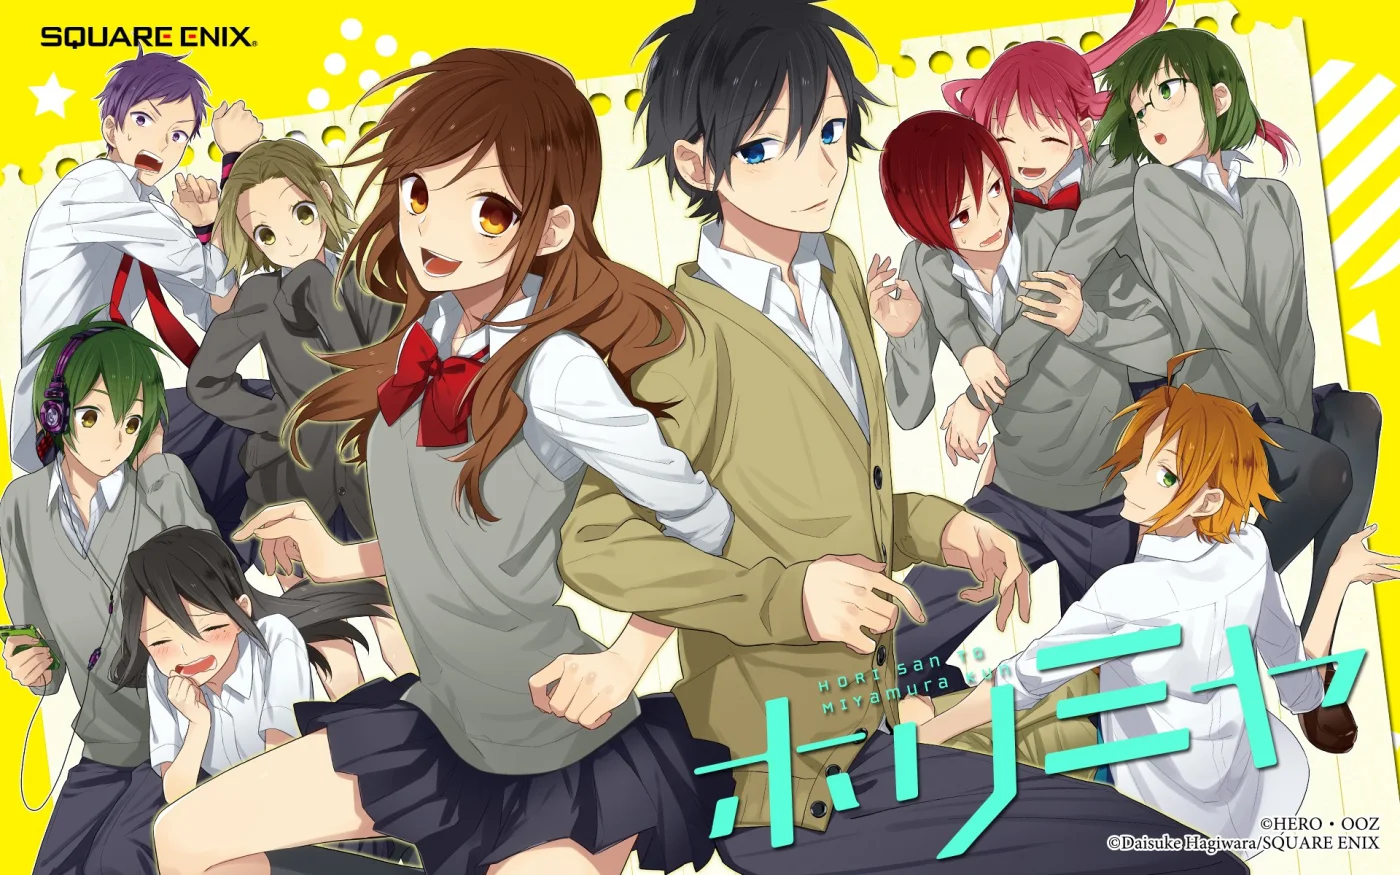 What Makes Horimiya The Best Rom-Com in Years? - This Week in